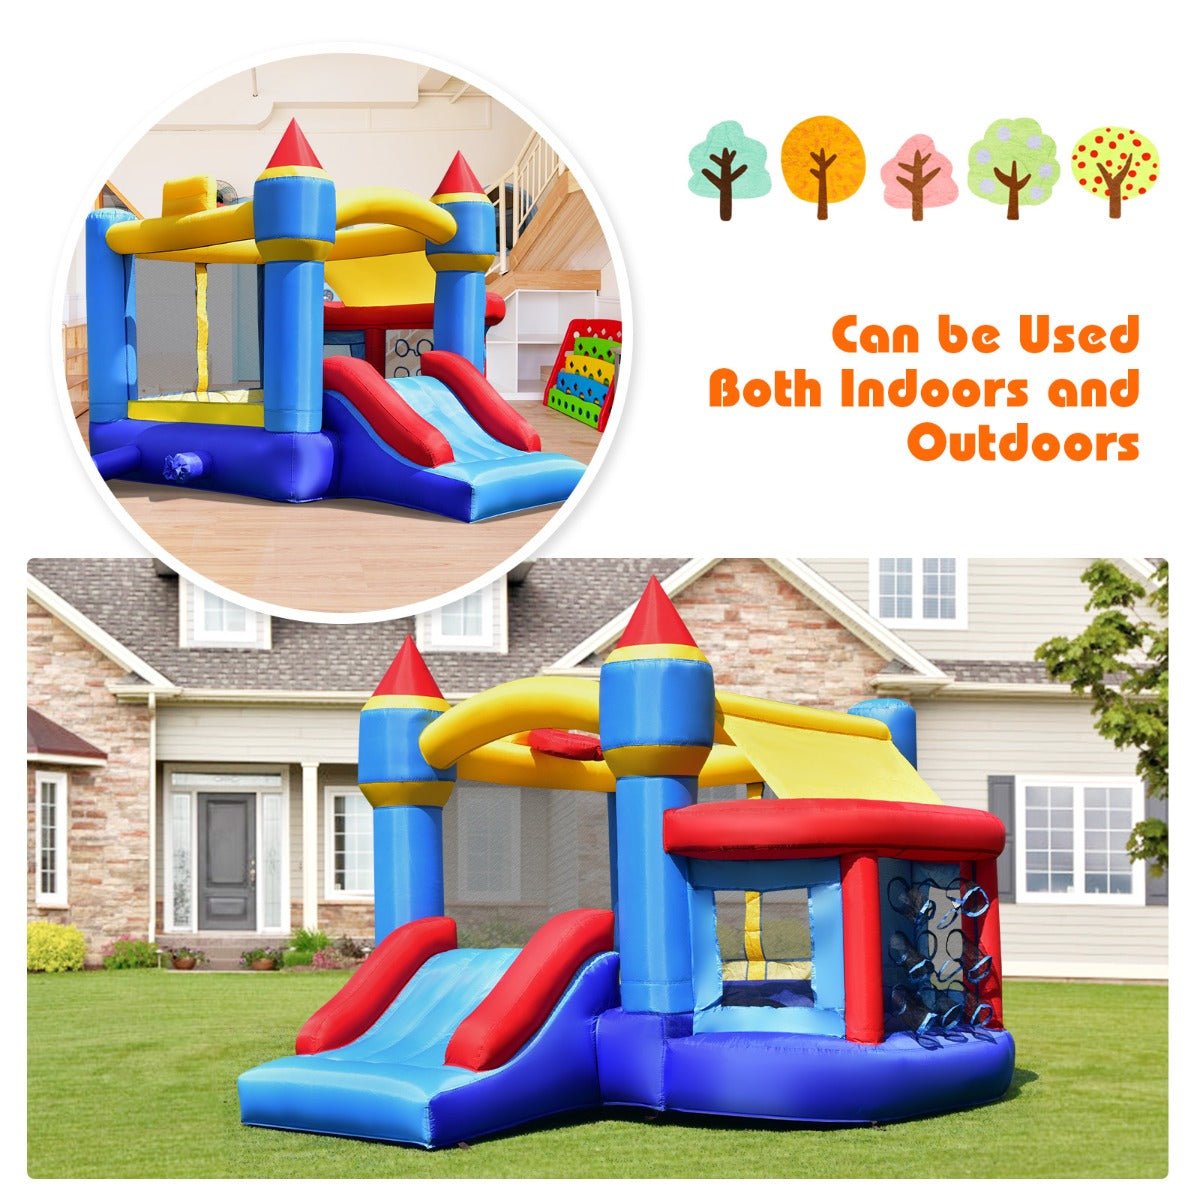 Complete Entertainment: 5-in-1 Inflatable Bouncer Castle with Slide for Children